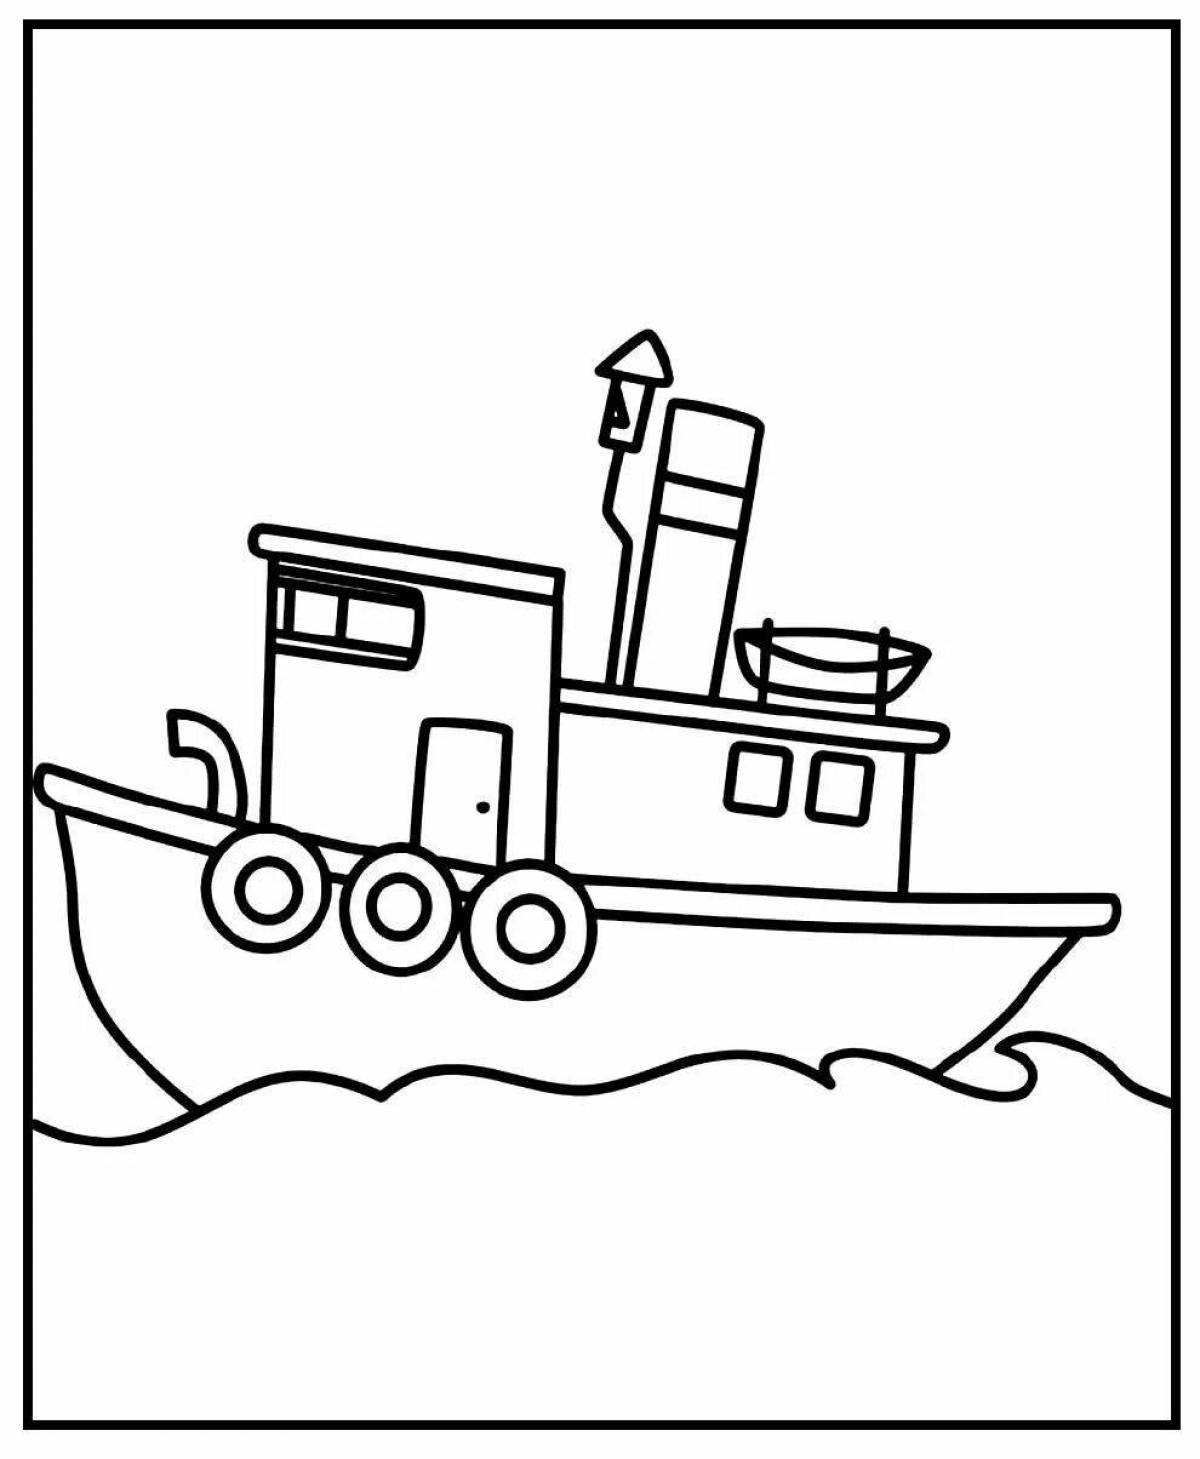 Adorable boat coloring book for 5-6 year olds